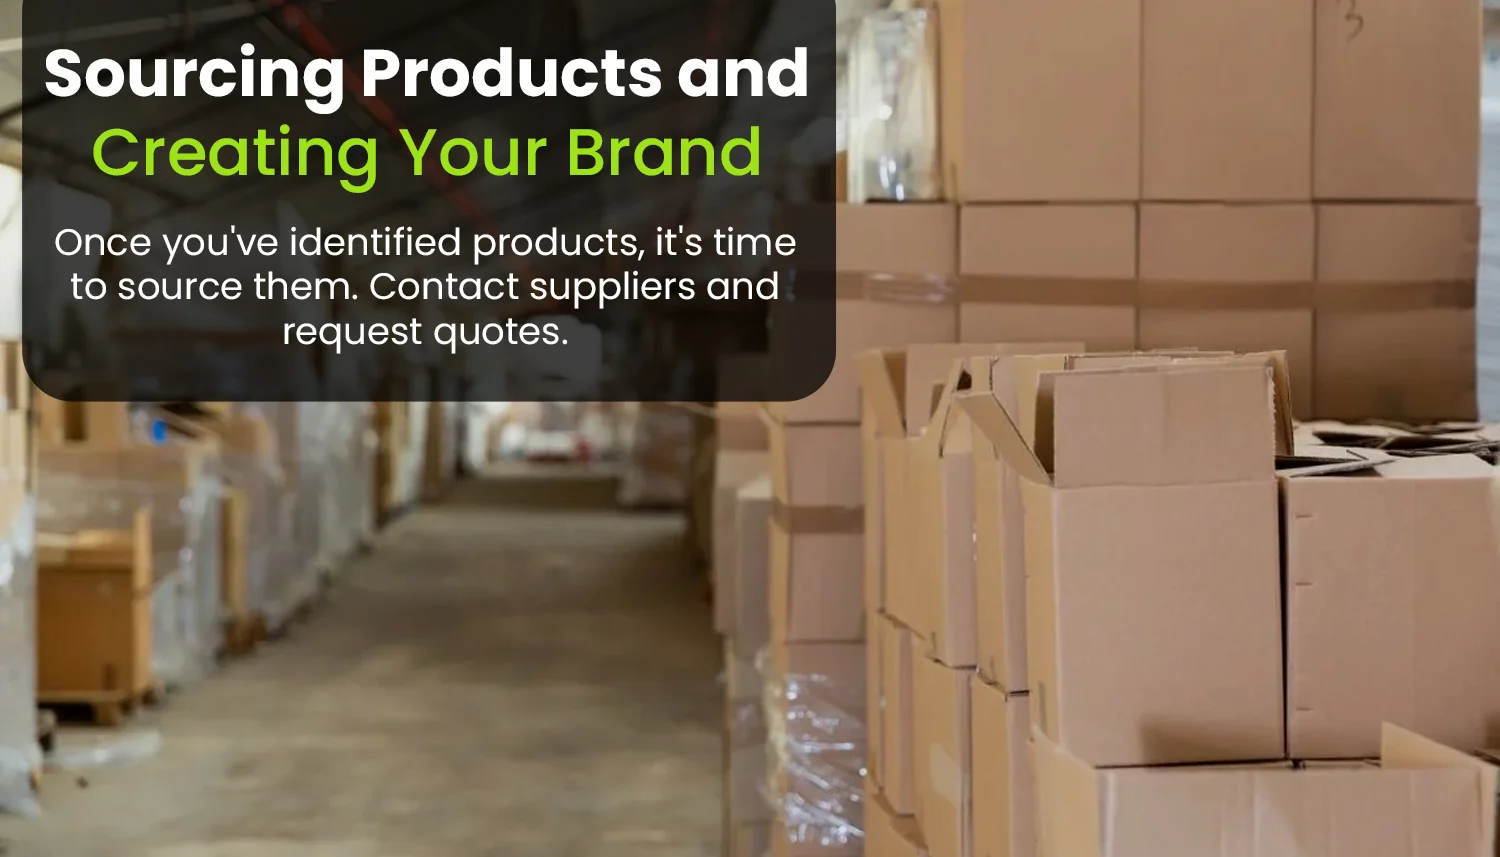 Sourcing Products and Creating Your Brand